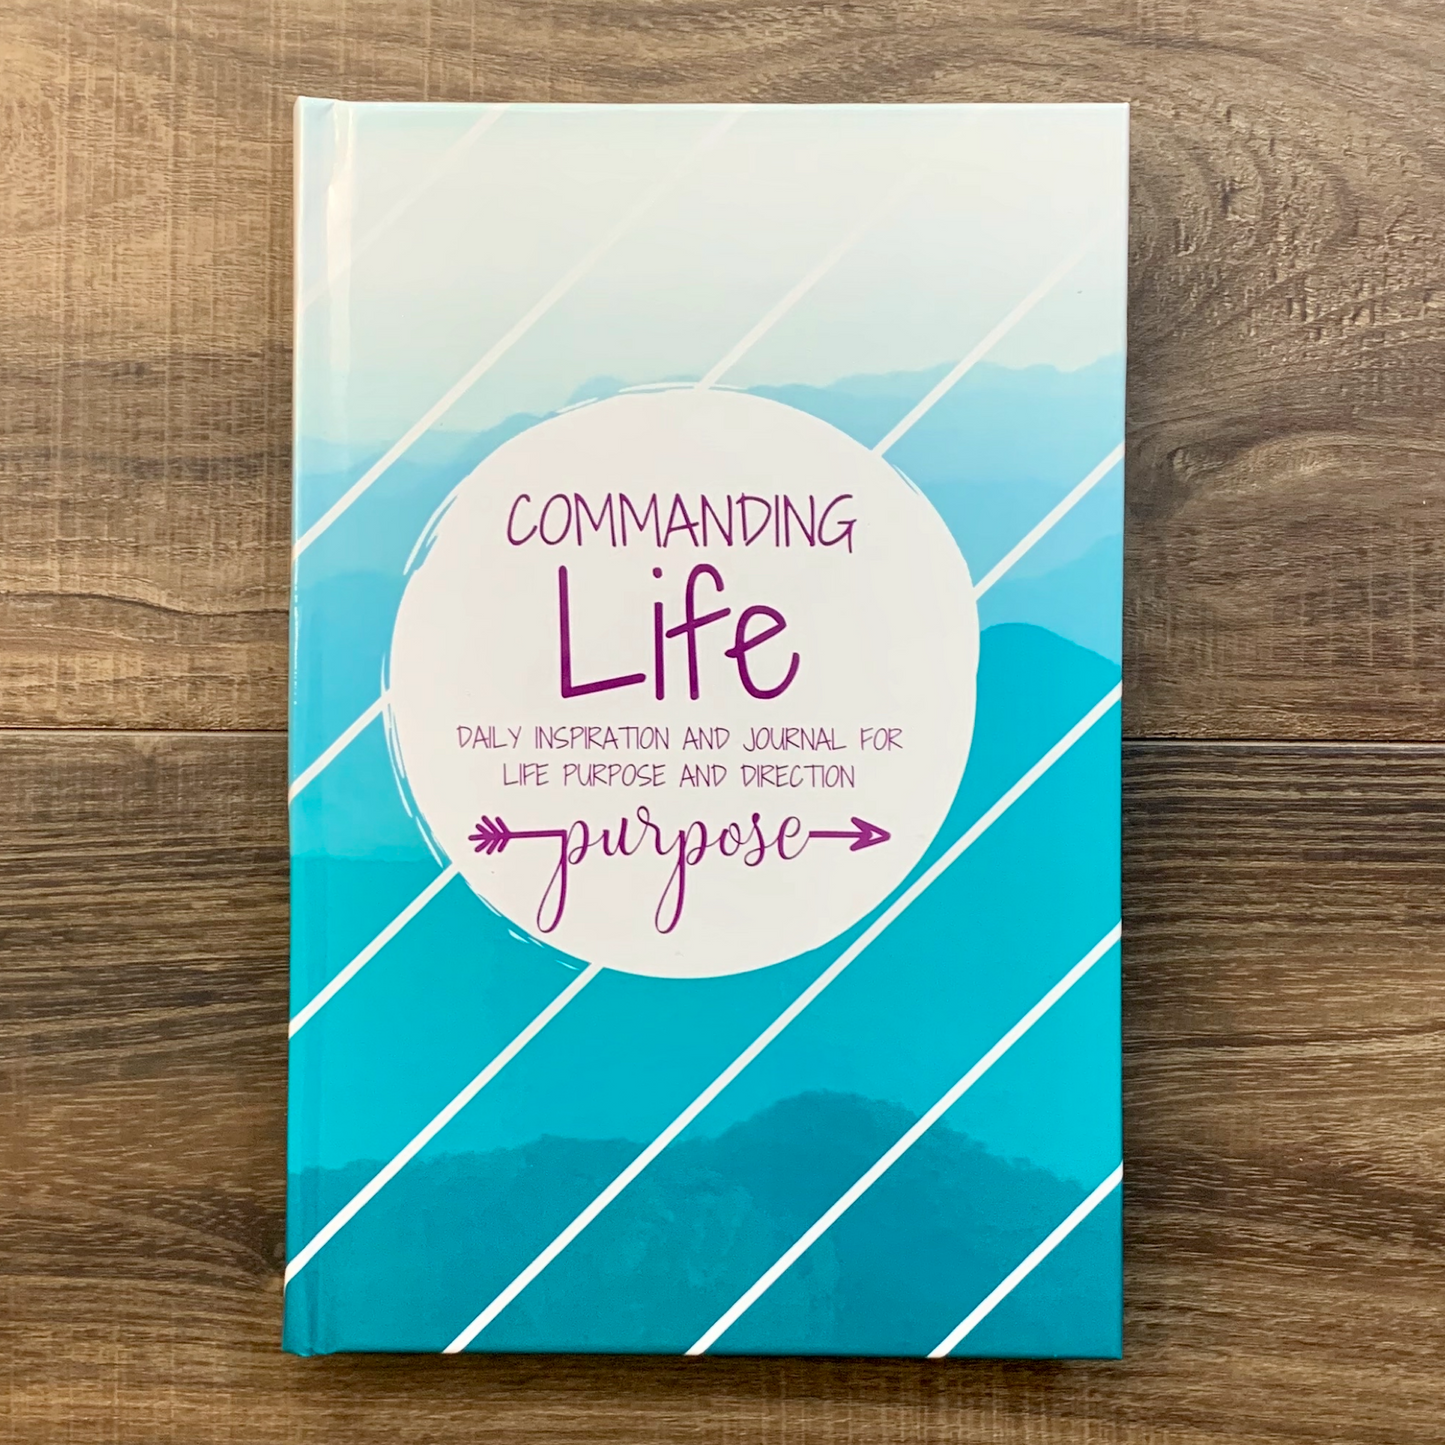 Inspiration and Journal for PURPOSE